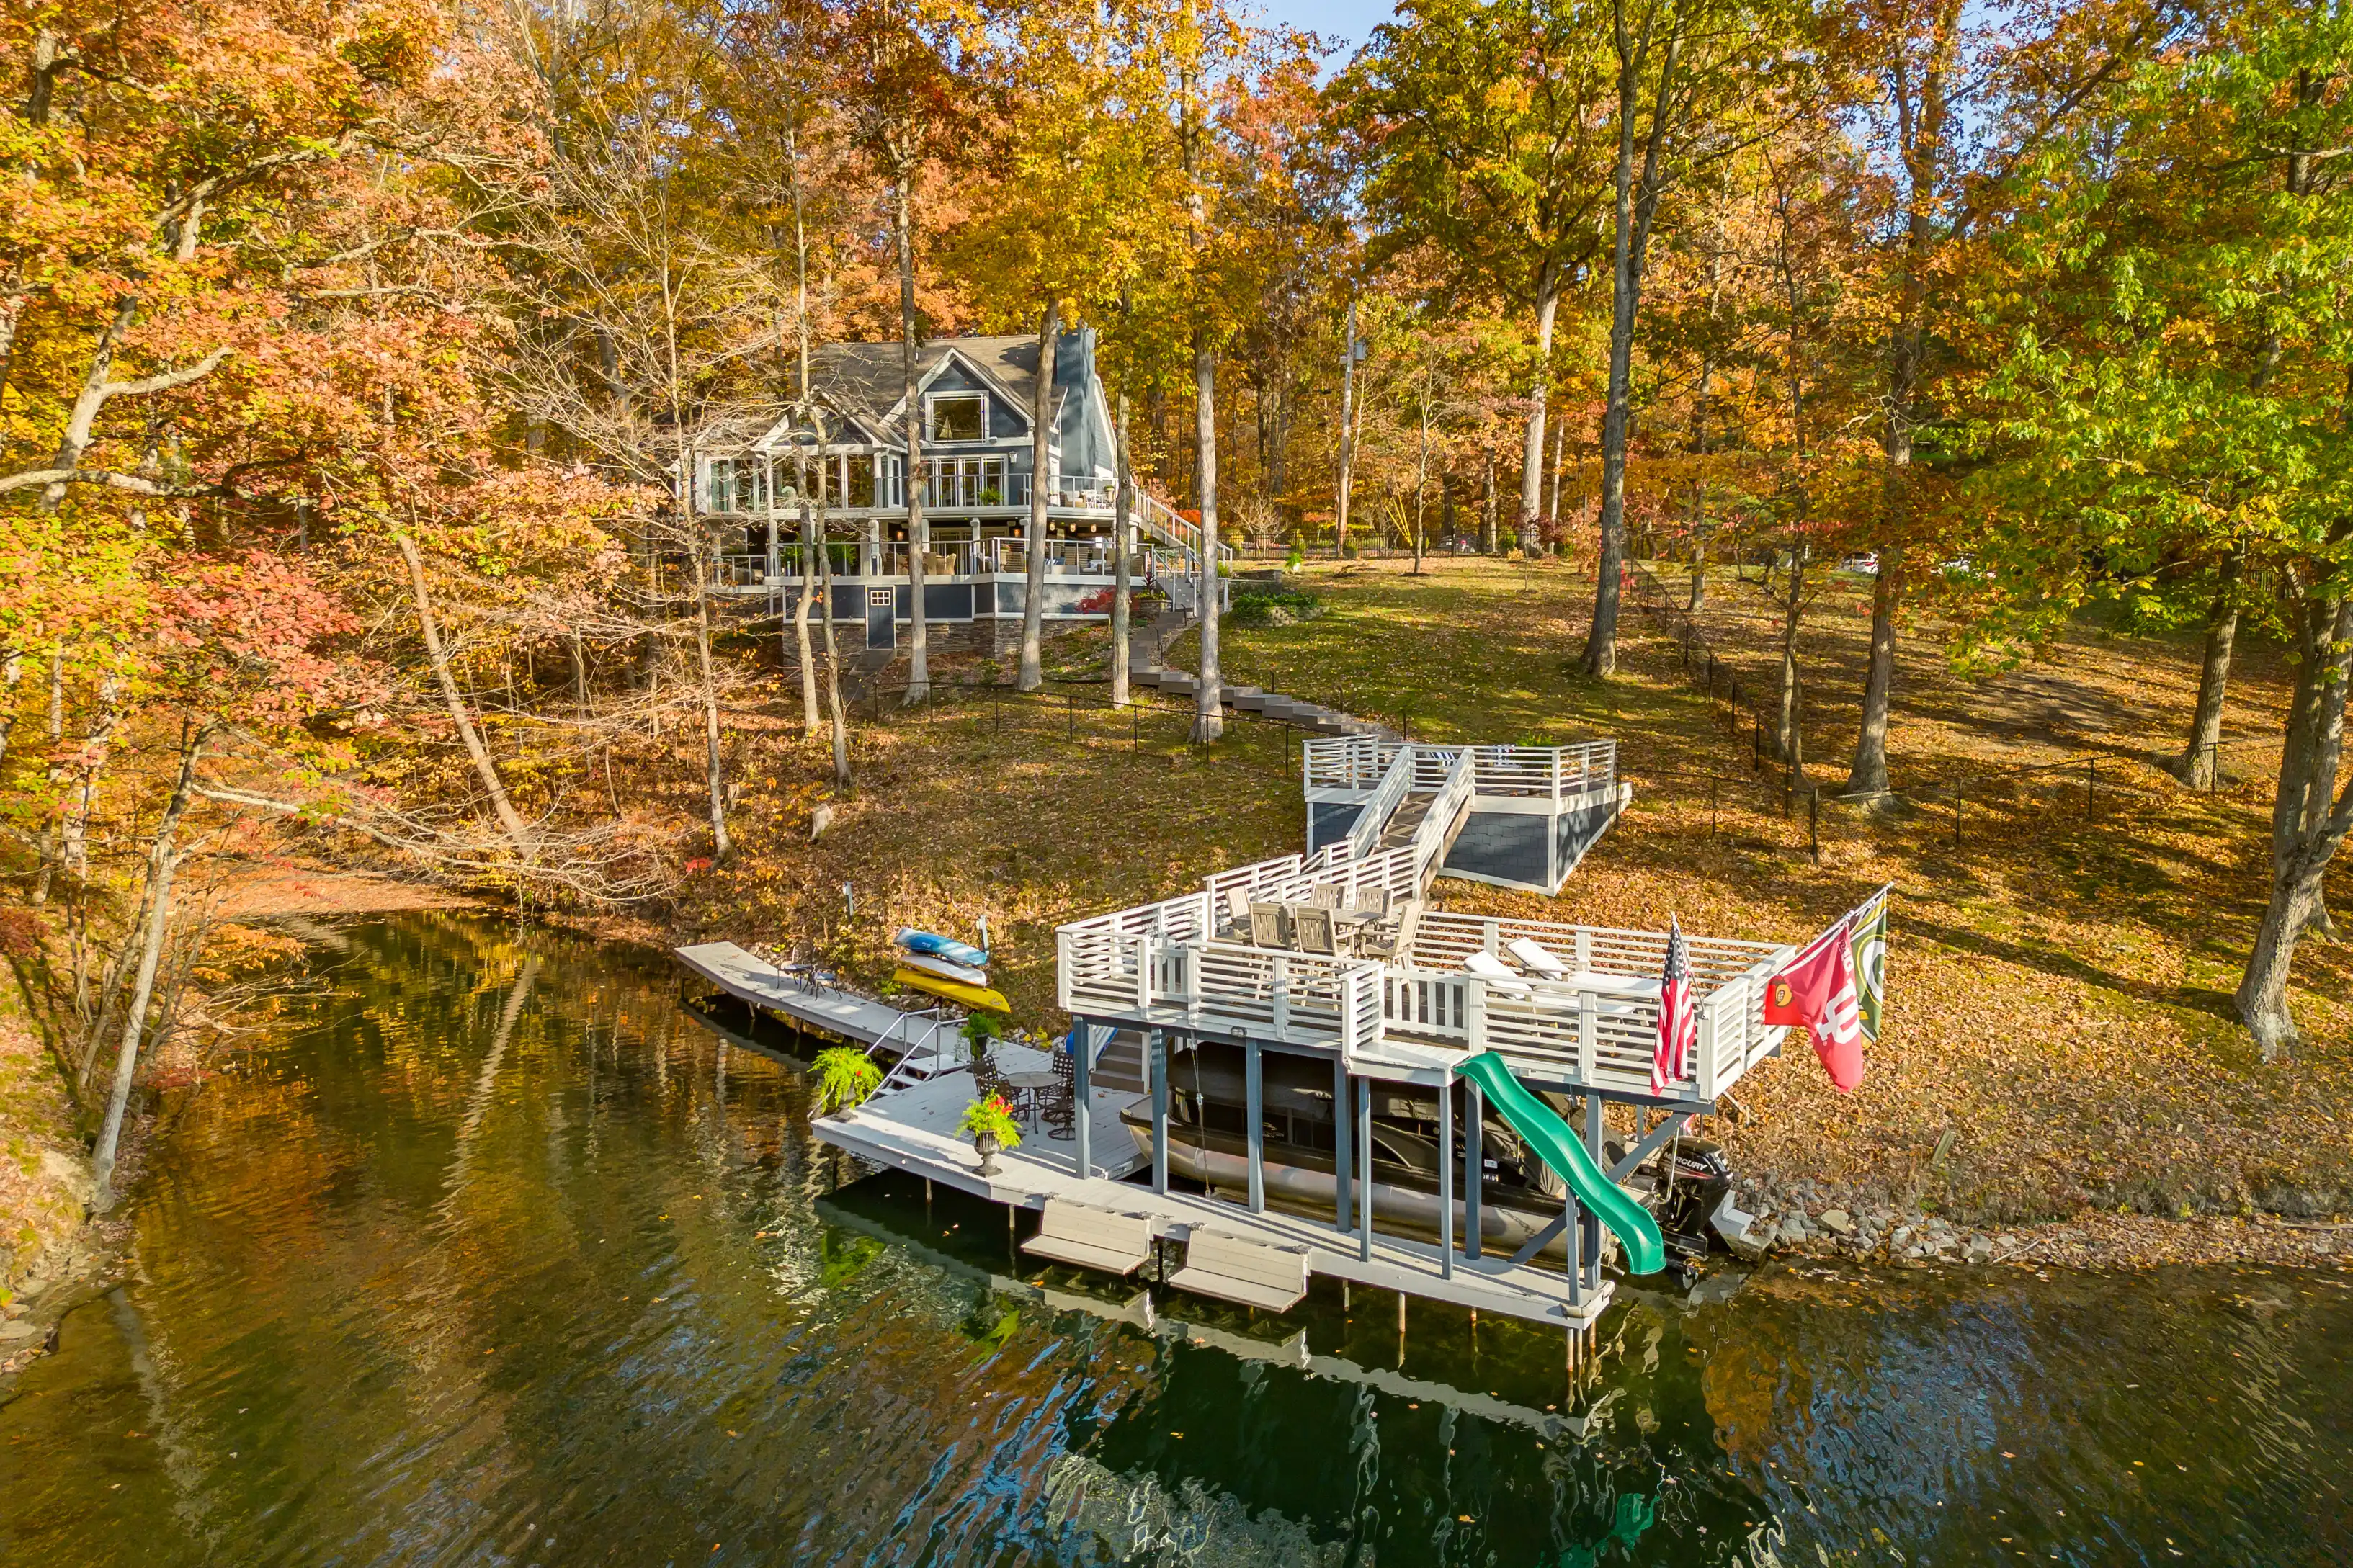 Aerial view of a lake house with a large wooden pier and a double-decker dock, surrounded by trees with autumn foliage.